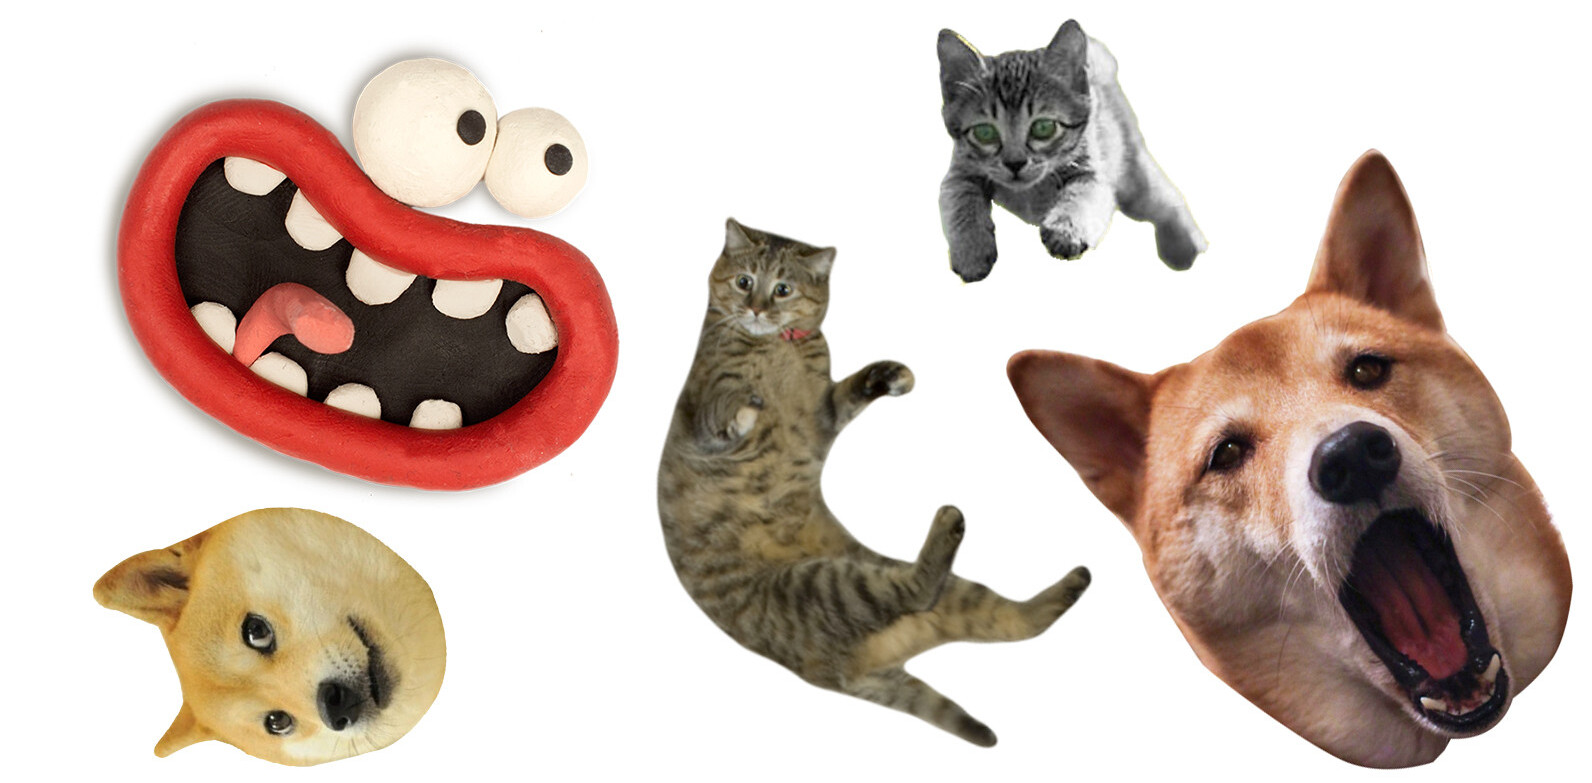 Check out these 5 ridiculous iMessage sticker packs for iOS 10